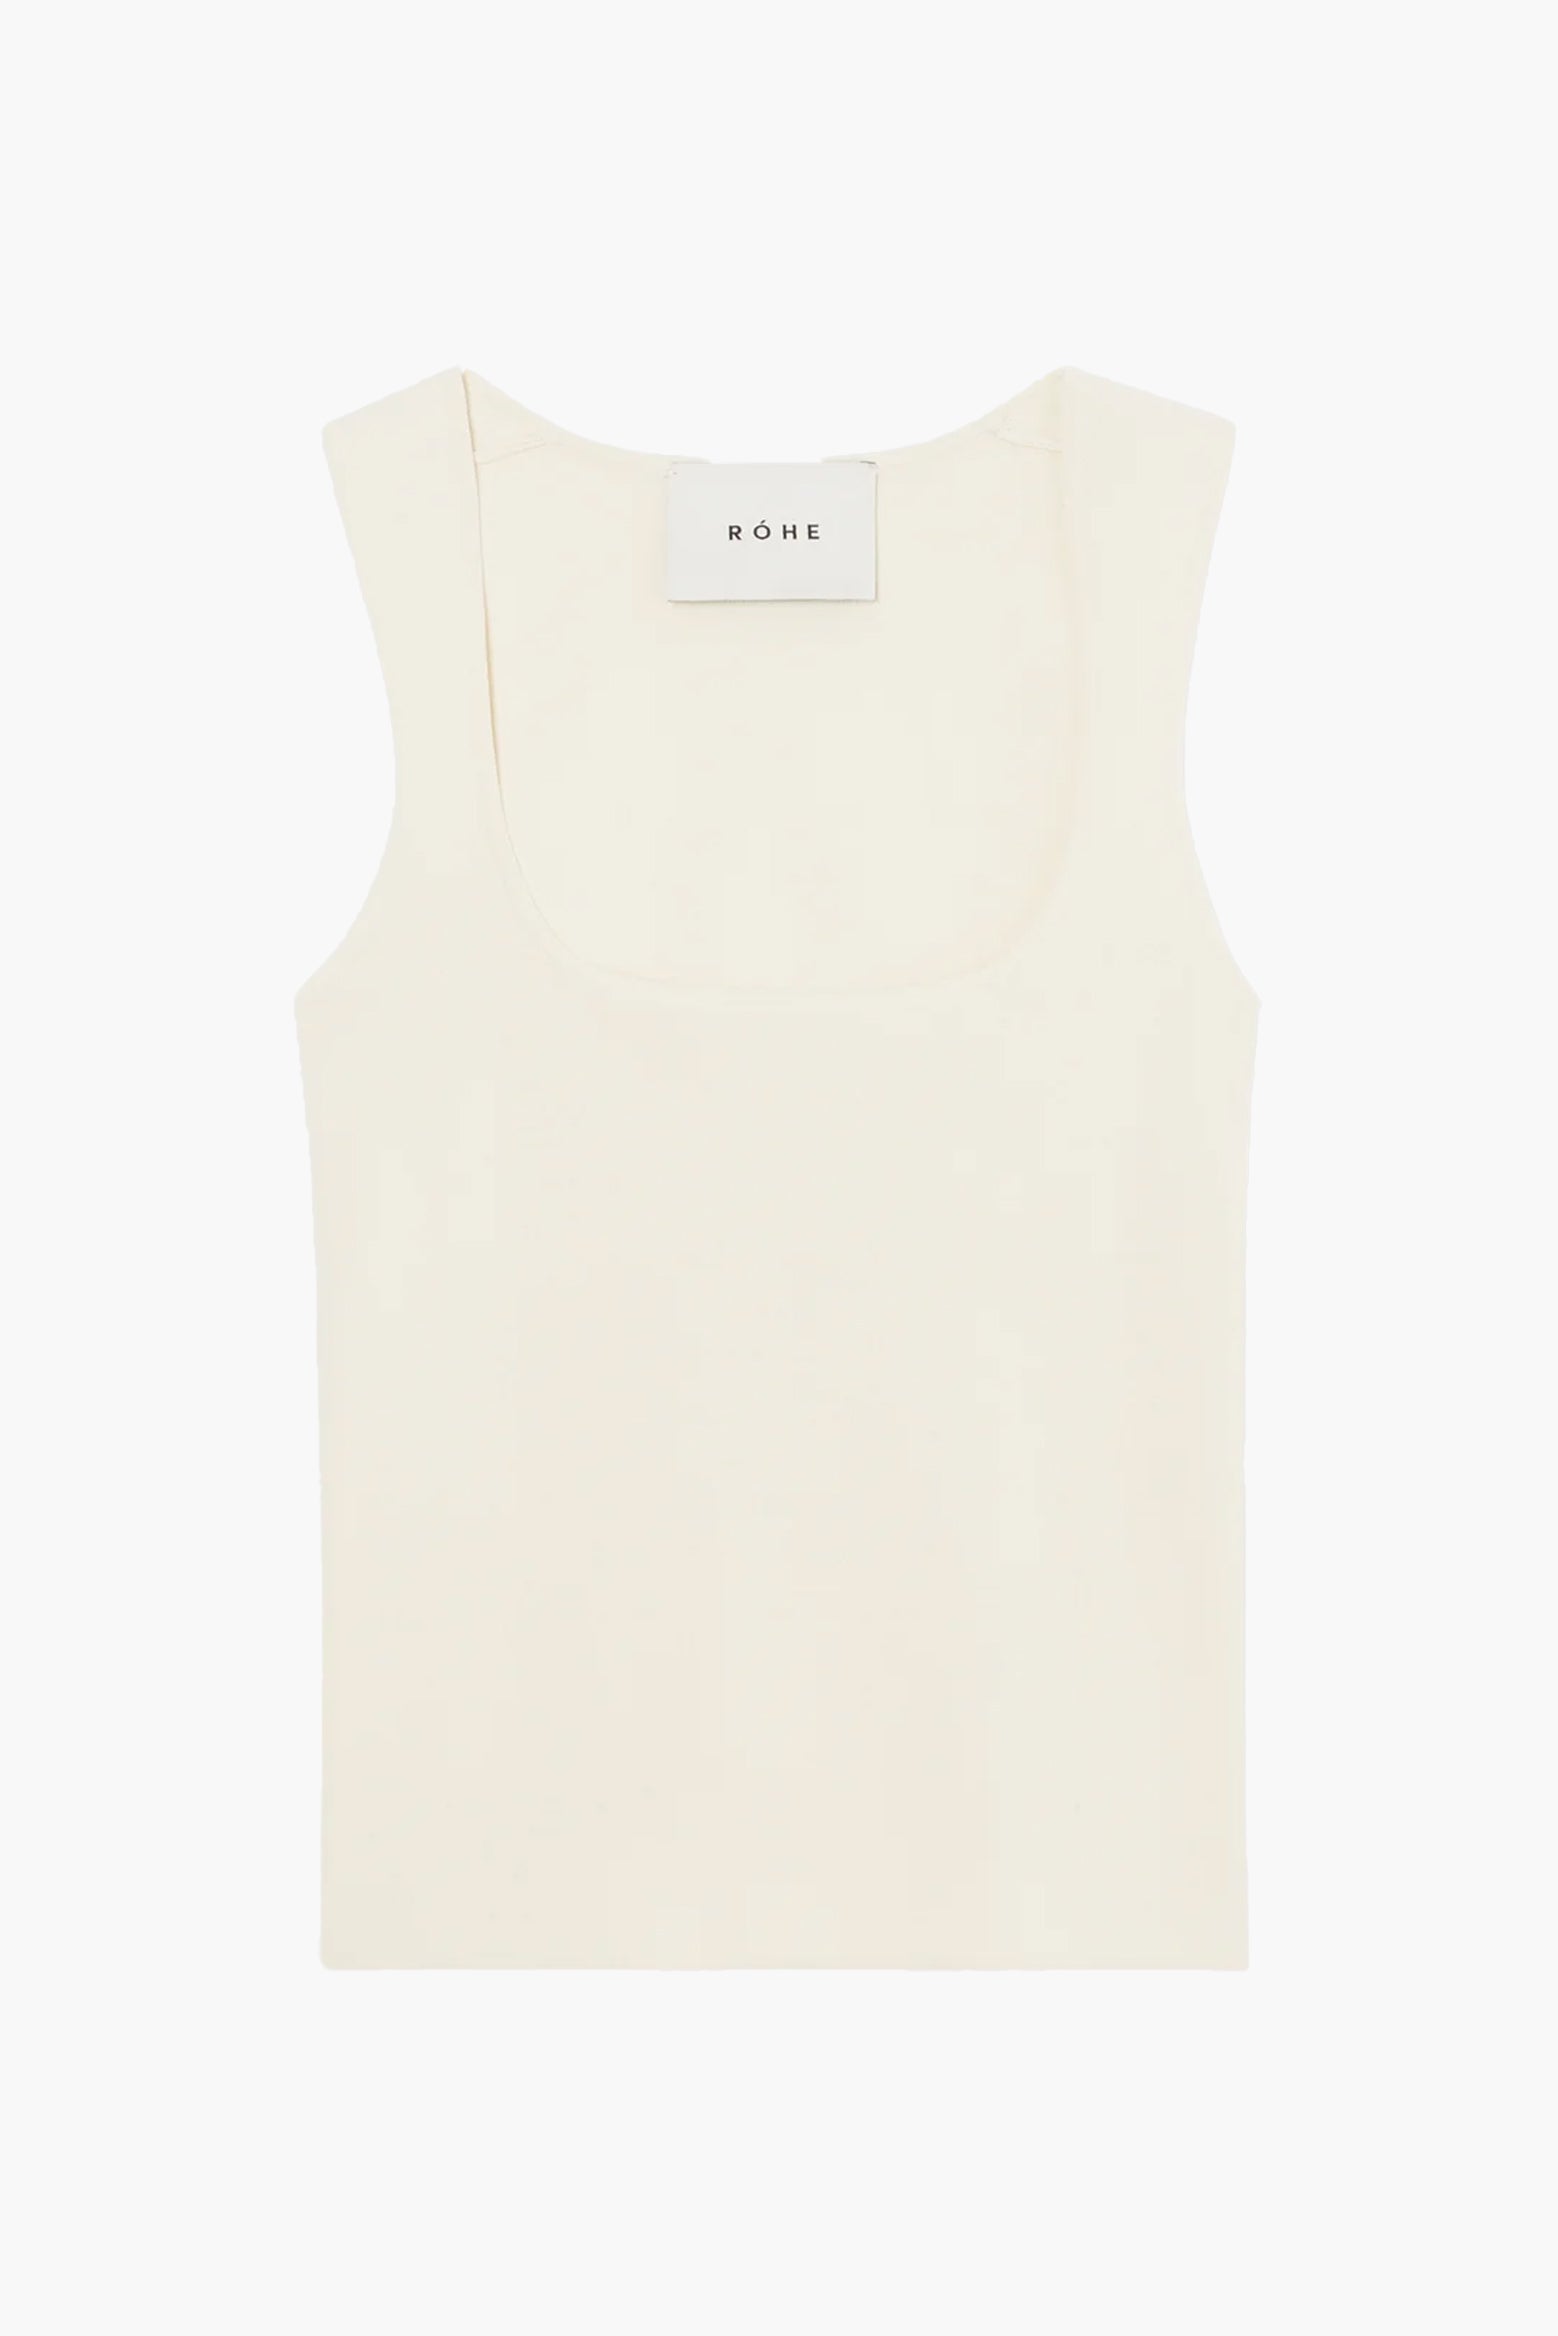 Rohe Bustier Bodice in Cream available at The New Trend Australia. 